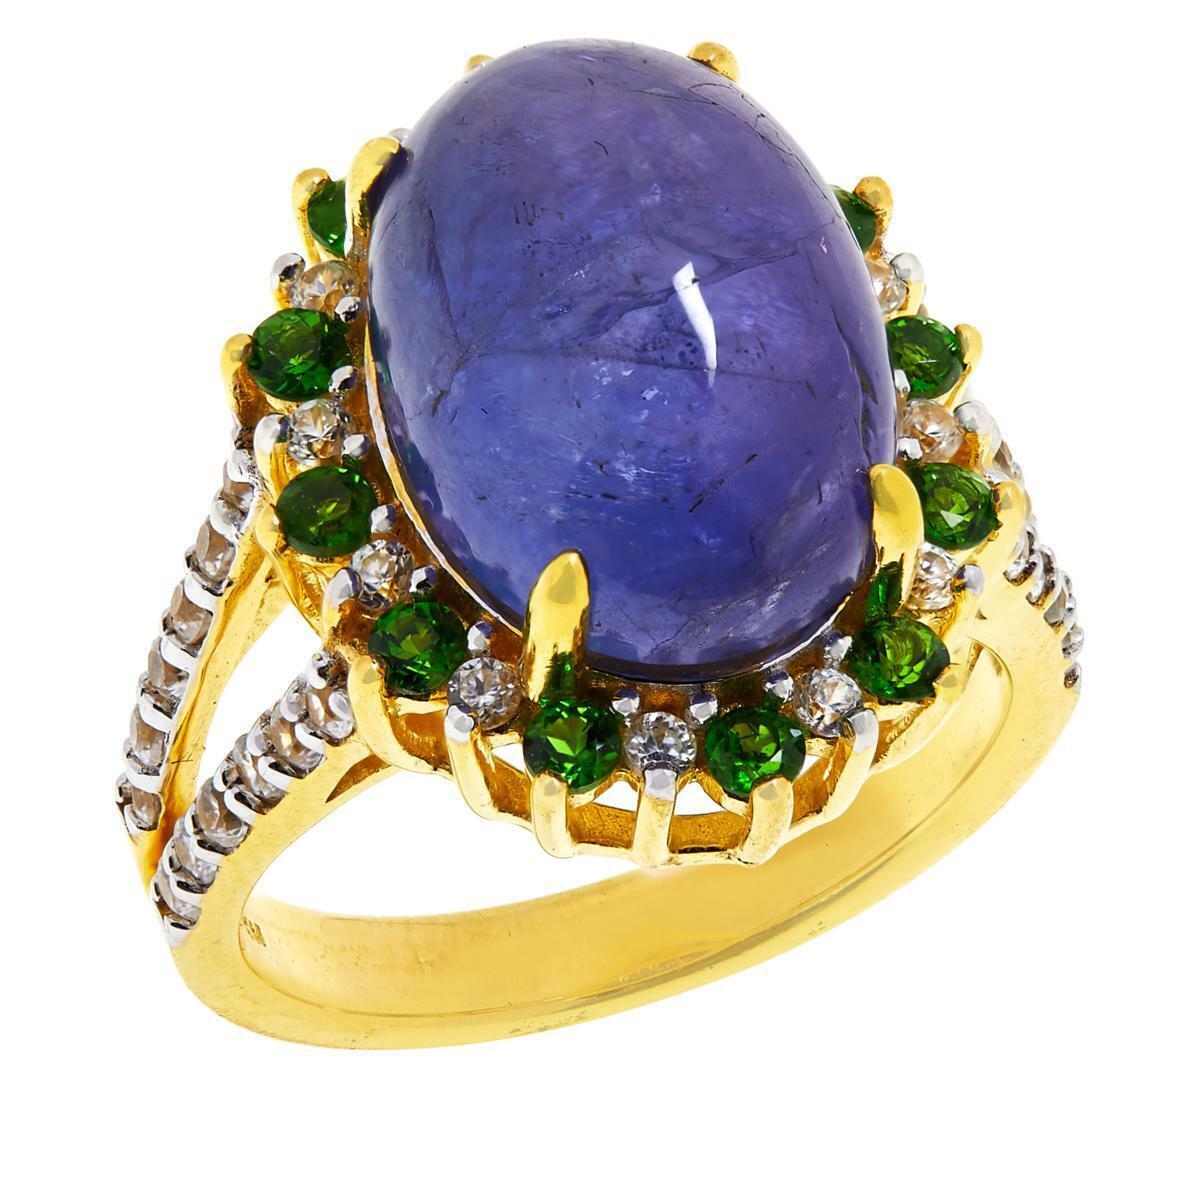 Colleen Lopez Gold-Plated Tanzanite, Chrome Diopside and Zircon Ring, Size 6